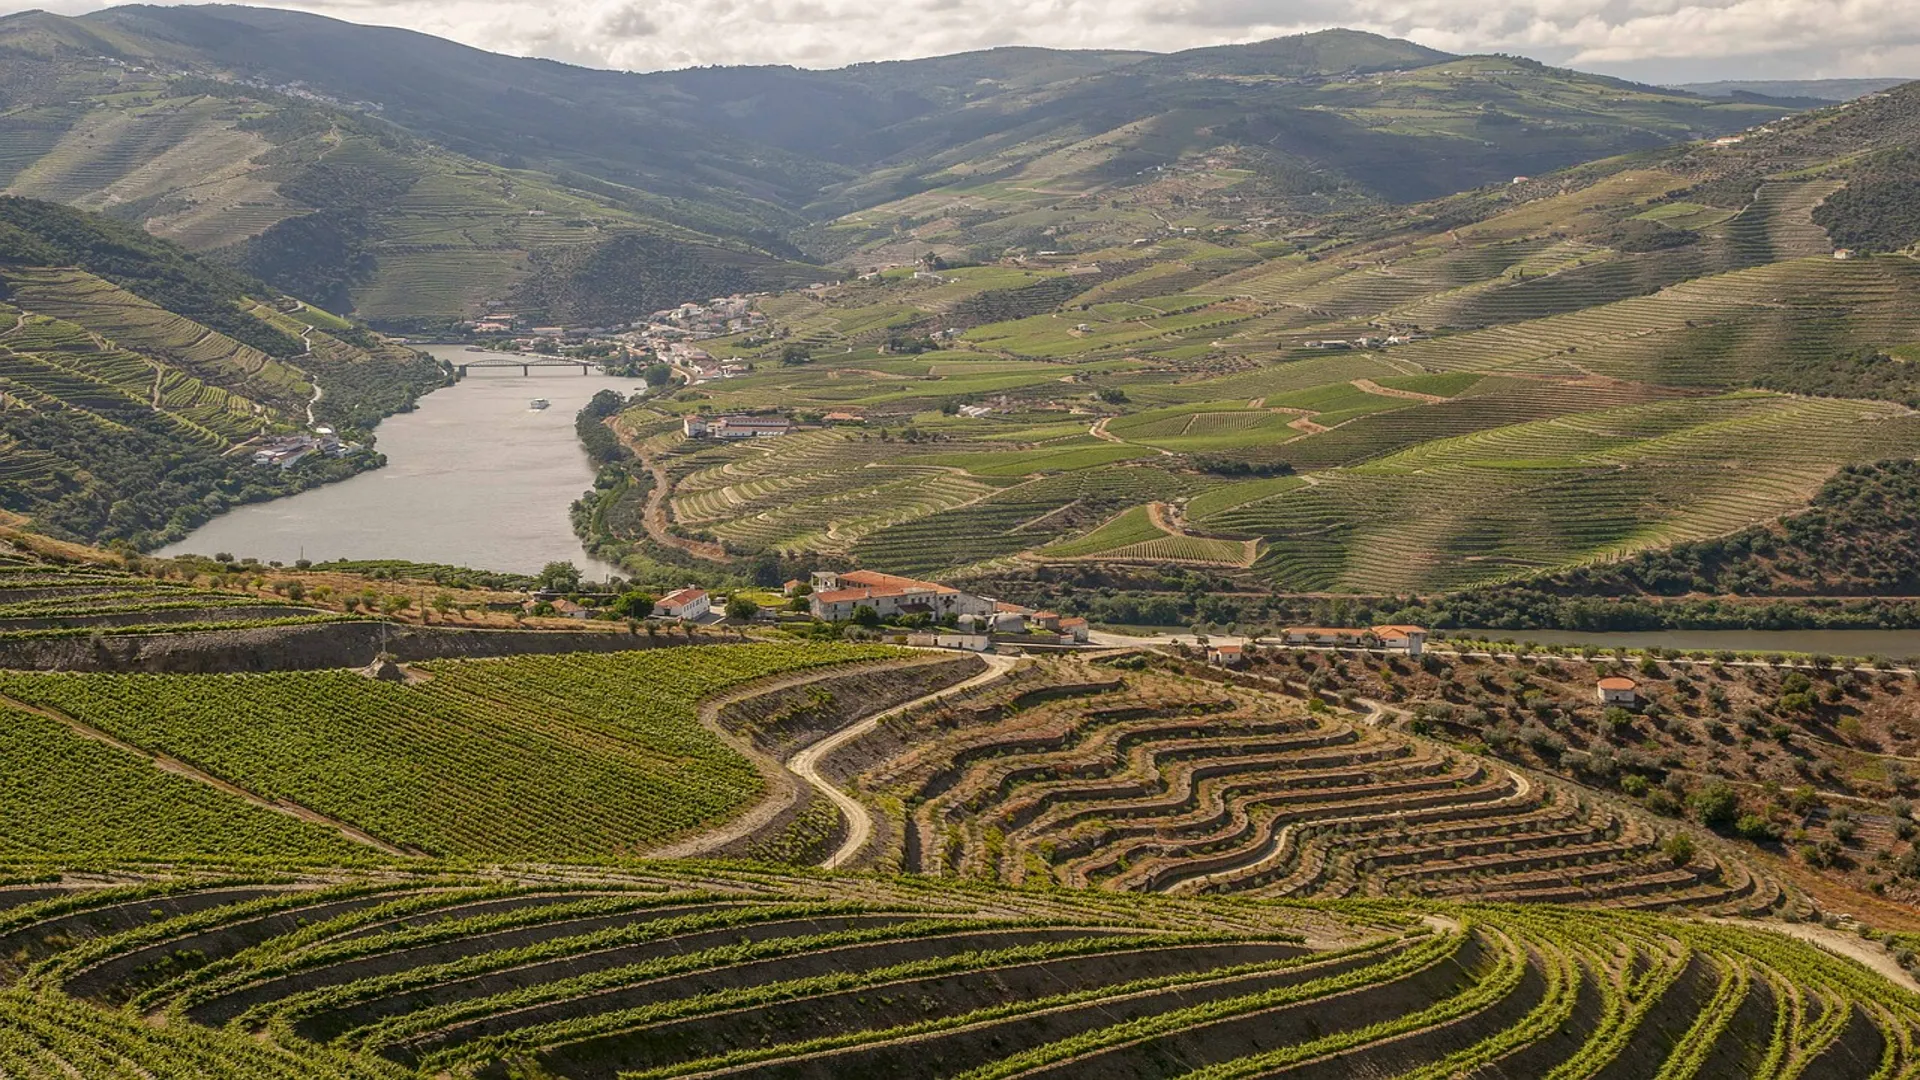 Exploring the douro valley a British travelers perspective